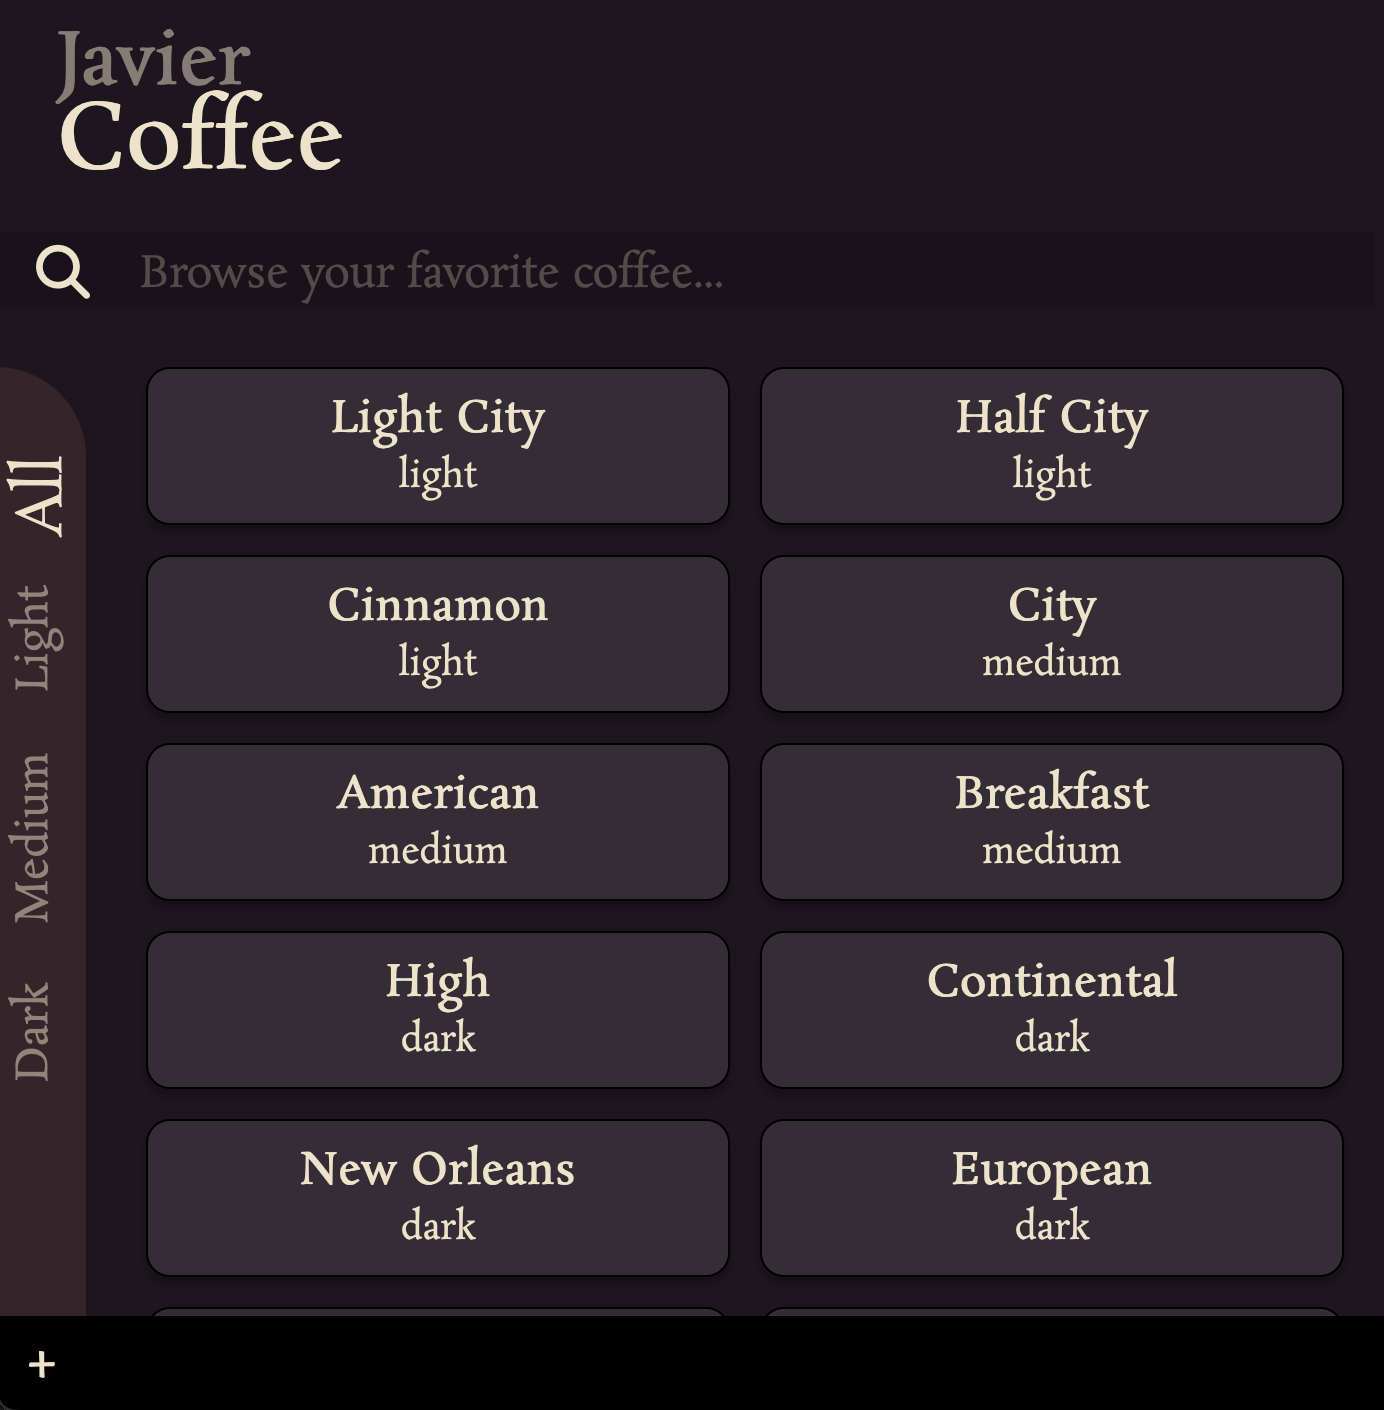 image of a web page displaying coffee options along with a menu for sorting by roast, a search bar, and an icon to add a new coffee to the list.